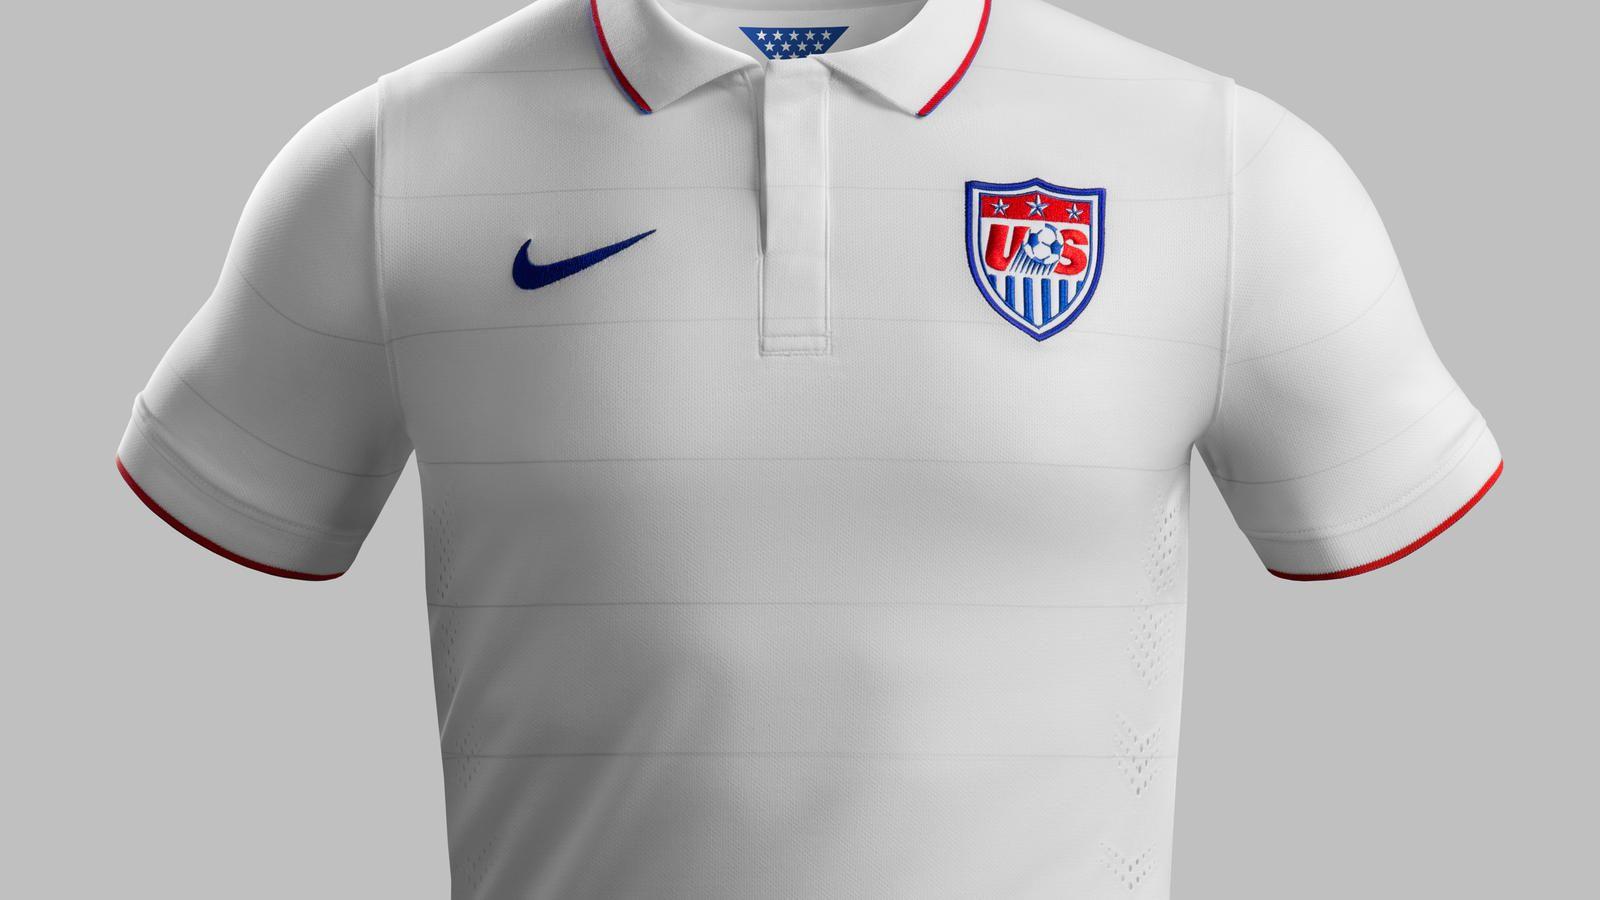 U.S. Unveils 2014 National Team Kit with Nike Soccer